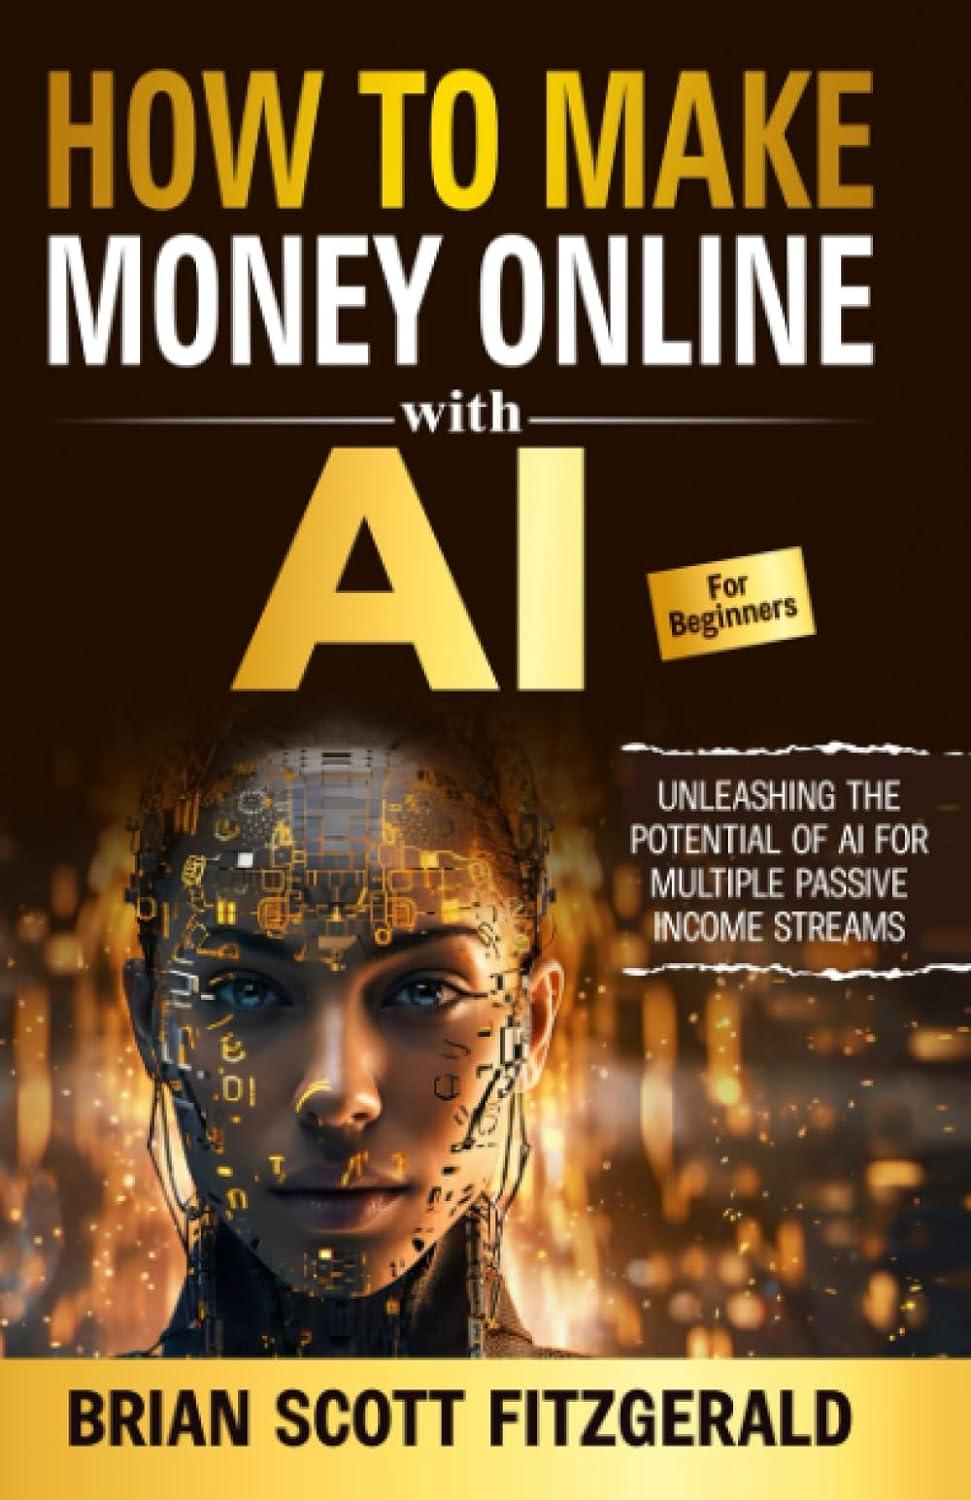 how to make money online with ai for beginners 1st edition brian scott fitzgerald b0ch2bm83s, 979-8859826889